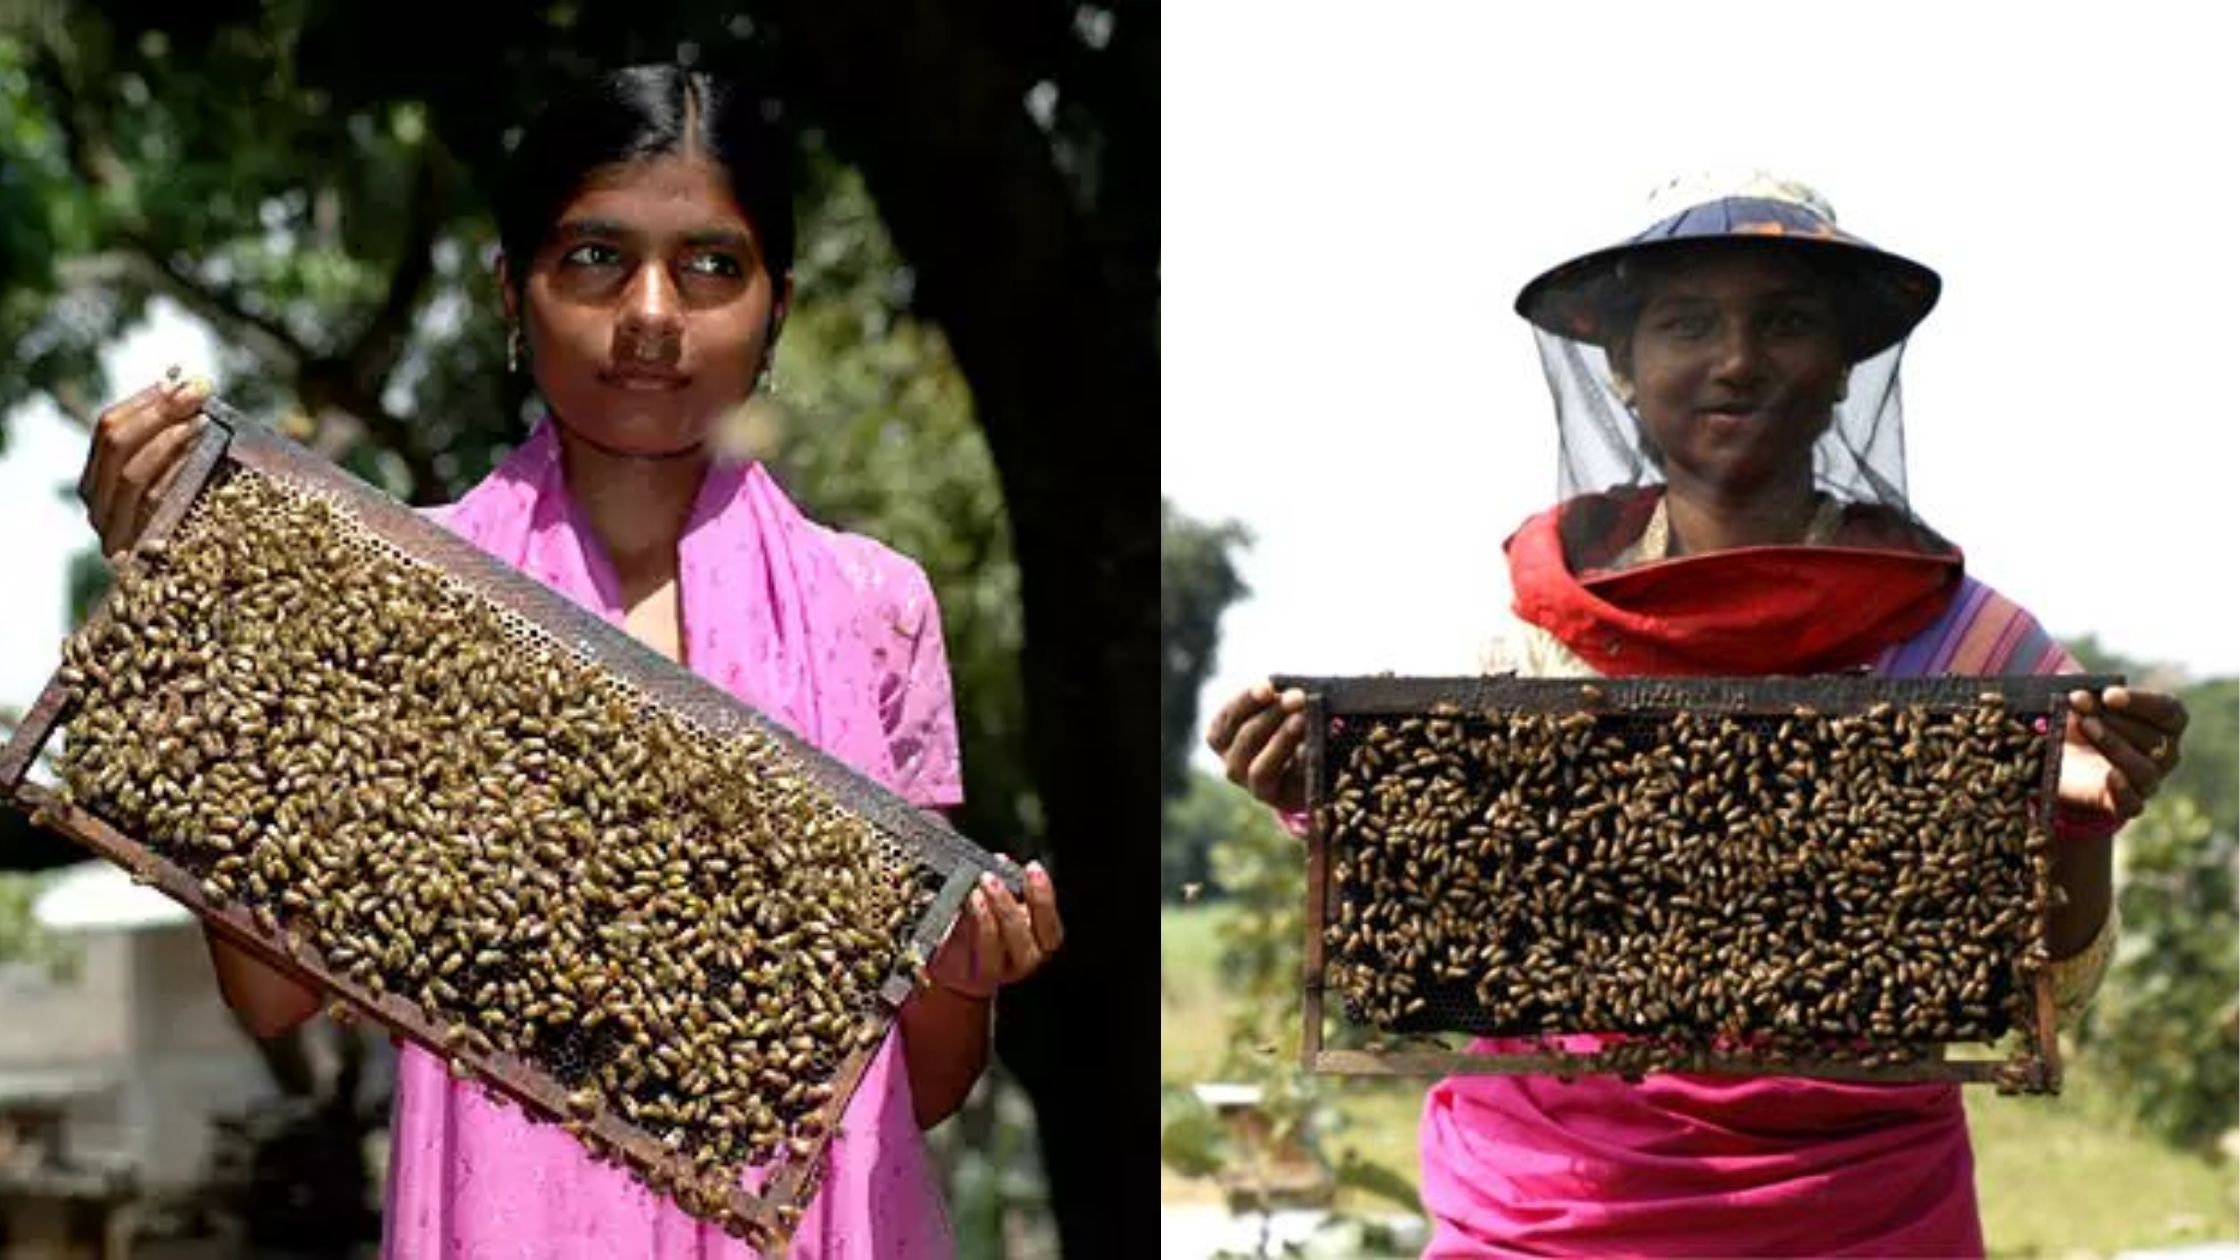 The doors of self-employment are opening in Bihar with the sweetness of honey